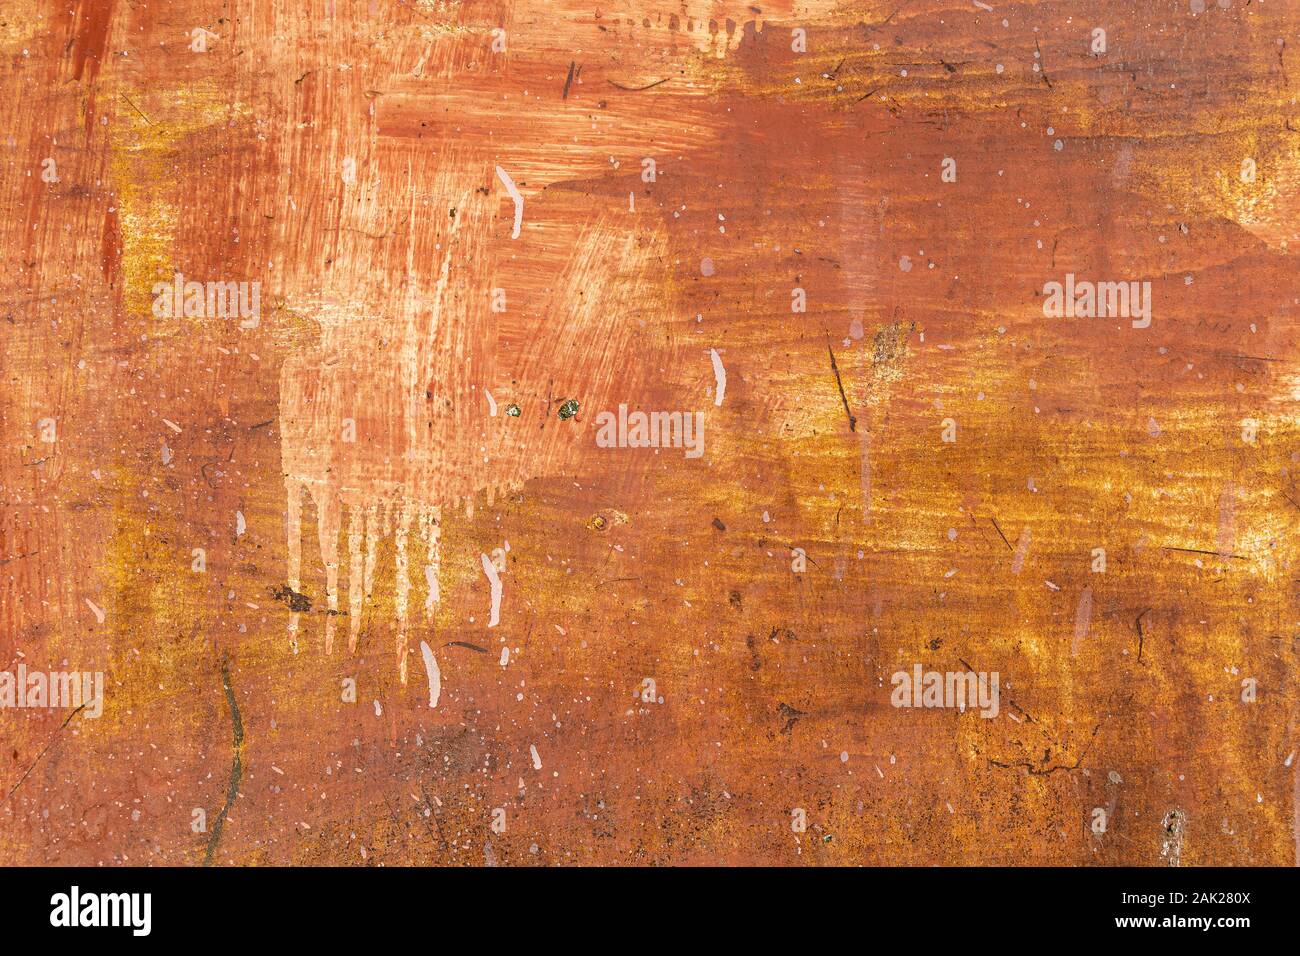 Old grunge rusty steel plate painted red,yellow,white color of background and texture. Stock Photo